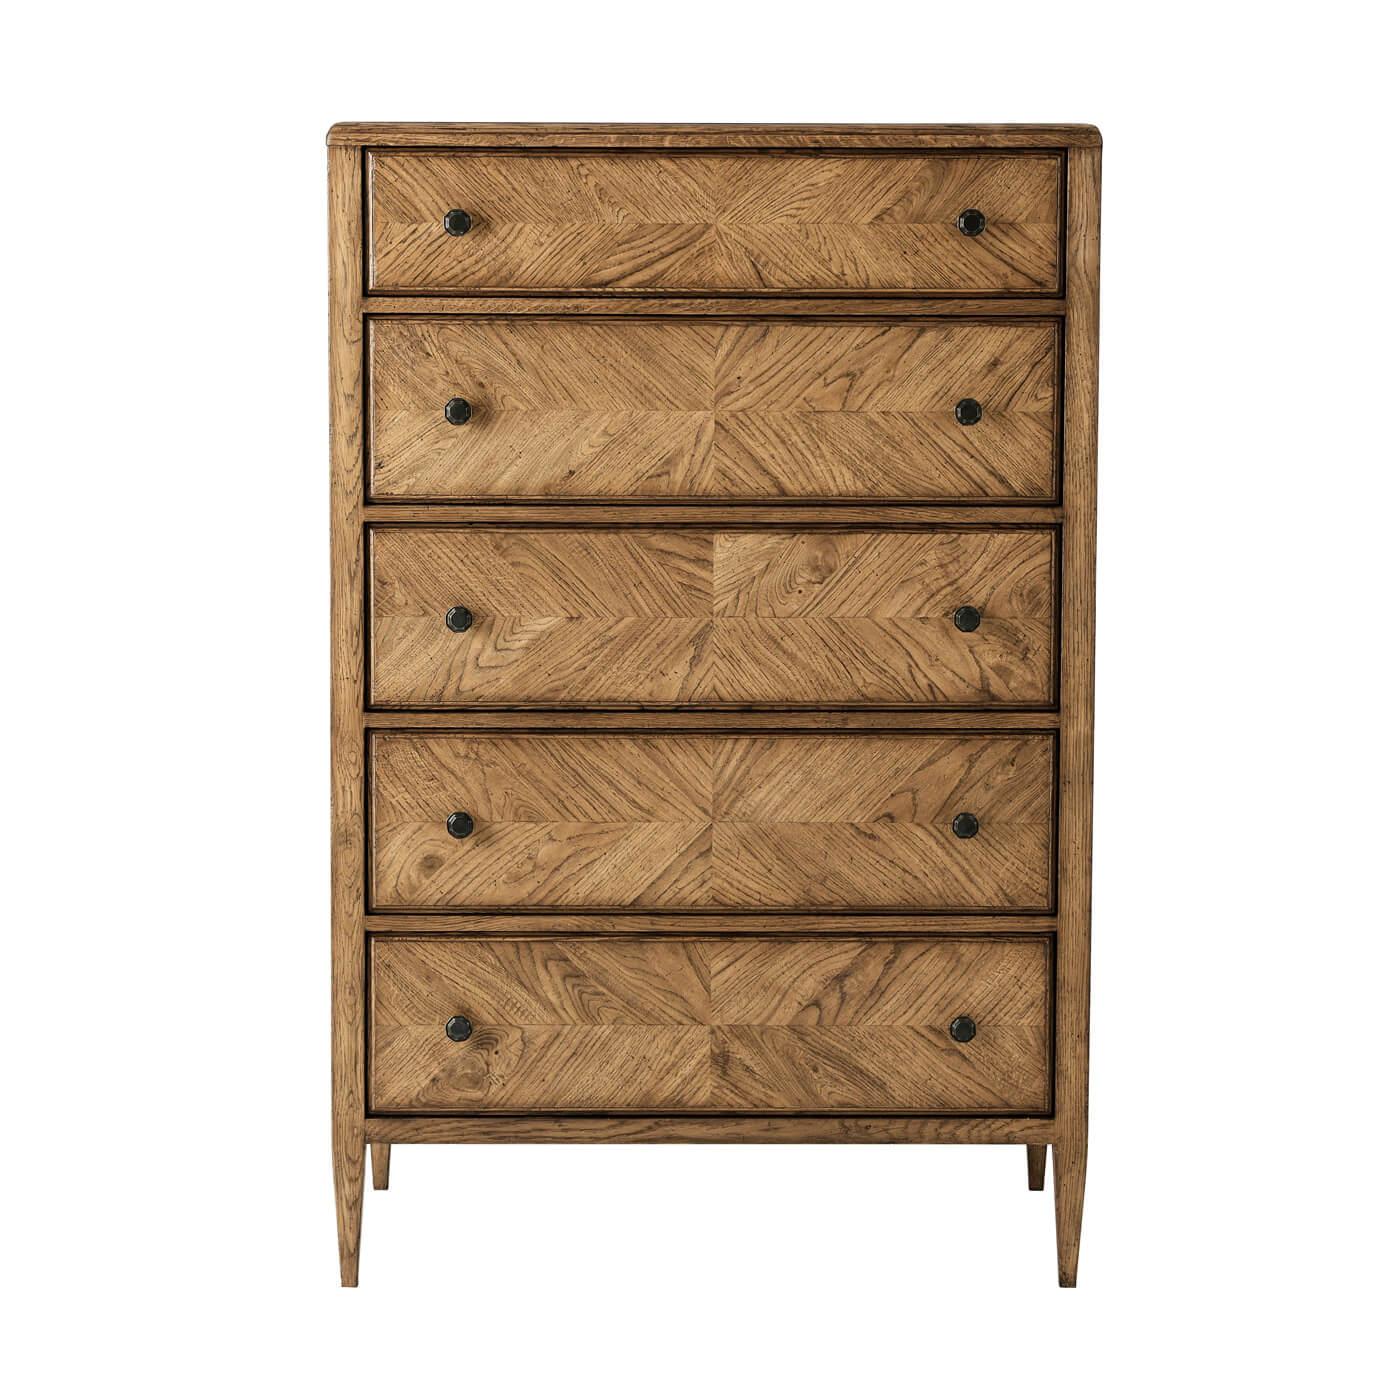 A neo classic style oak parquetry tall chest of drawers with mirrored herringbone oak parquetry including five deep drawers accented with Verde Bronze finished handles on tapered oak legs in our Dwan finish.
Dimensions: 36